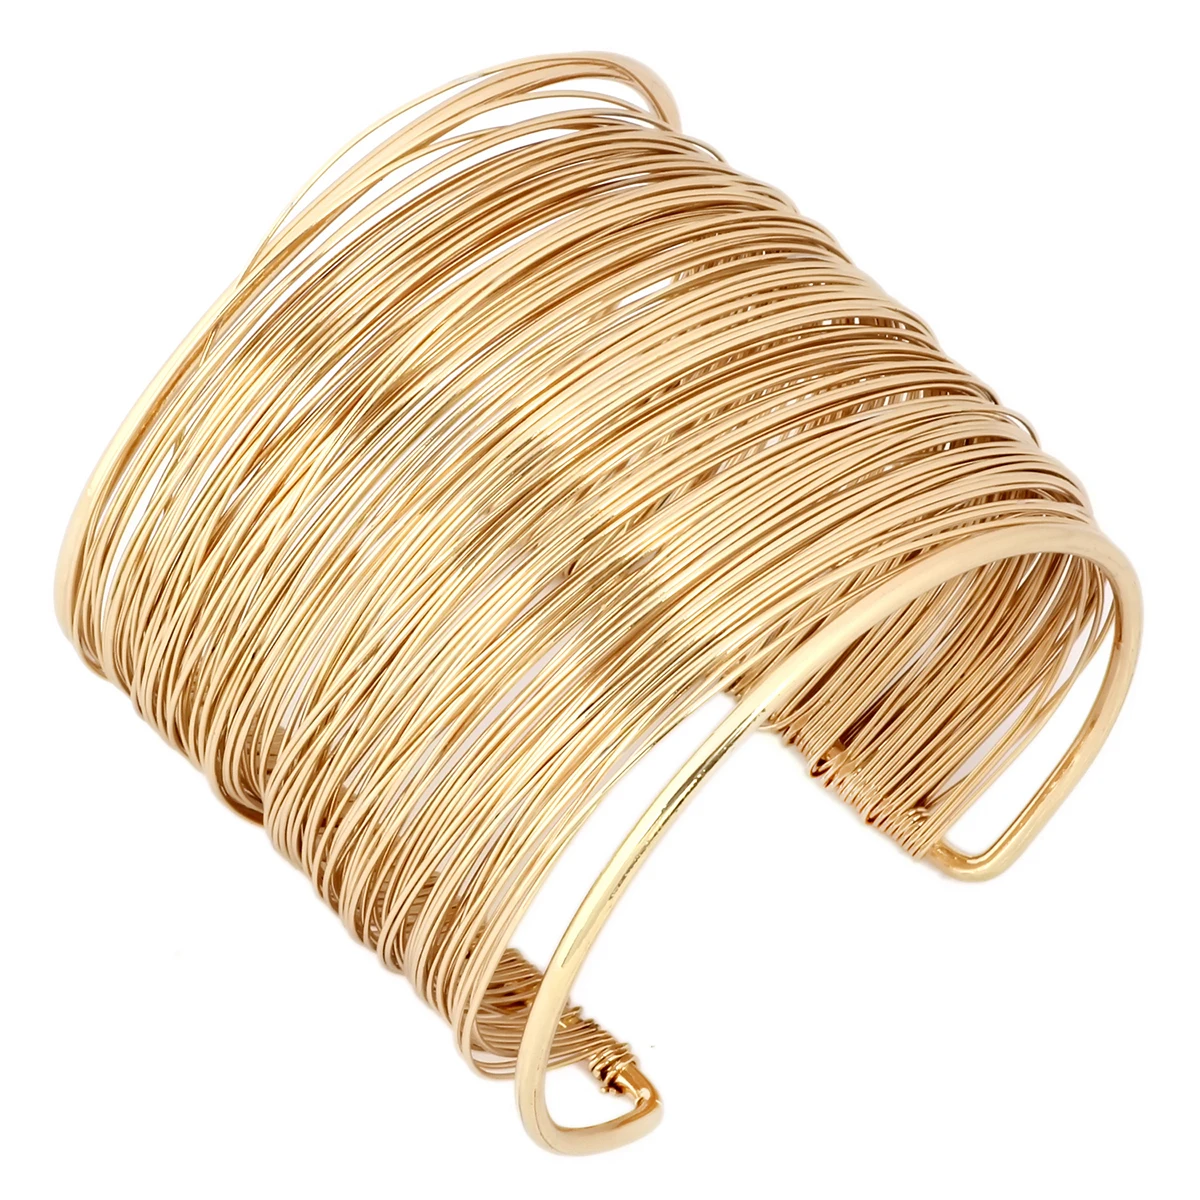 QTMY Alloy Metal Gold Thin Thread Wire Open Cuff Wide Bracelet Bangle 